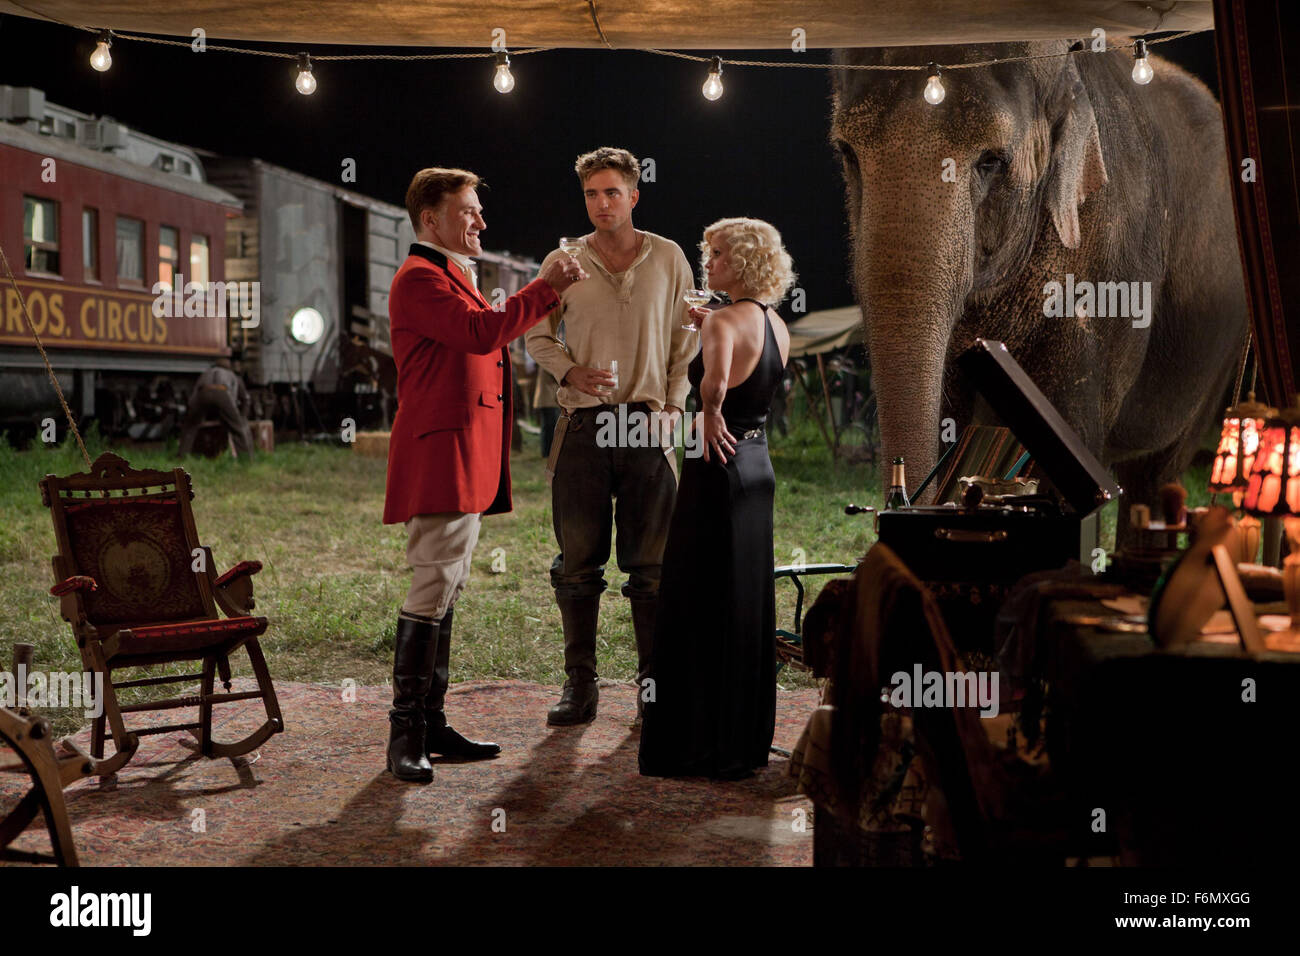 RELEASE DATE: April 22, 2011  MOVIE TITLE: Water for Elephants  STUDIO: 3 Arts Entertainment  DIRECTOR: Francis Lawrence  PLOT: A veterinary student abandons his studies after his parents are killed and joins a traveling circus as their vet  PICTURED: ROBERT PATTINSON as Jacob Jankowski, REESE WITHERSPOON as Marlena Rosenbluth, CHRISTOPH WALTZ as August Rosenbluth  (Credit Image: c 3 Arts Entertainment/Entertainment Pictures) Stock Photo